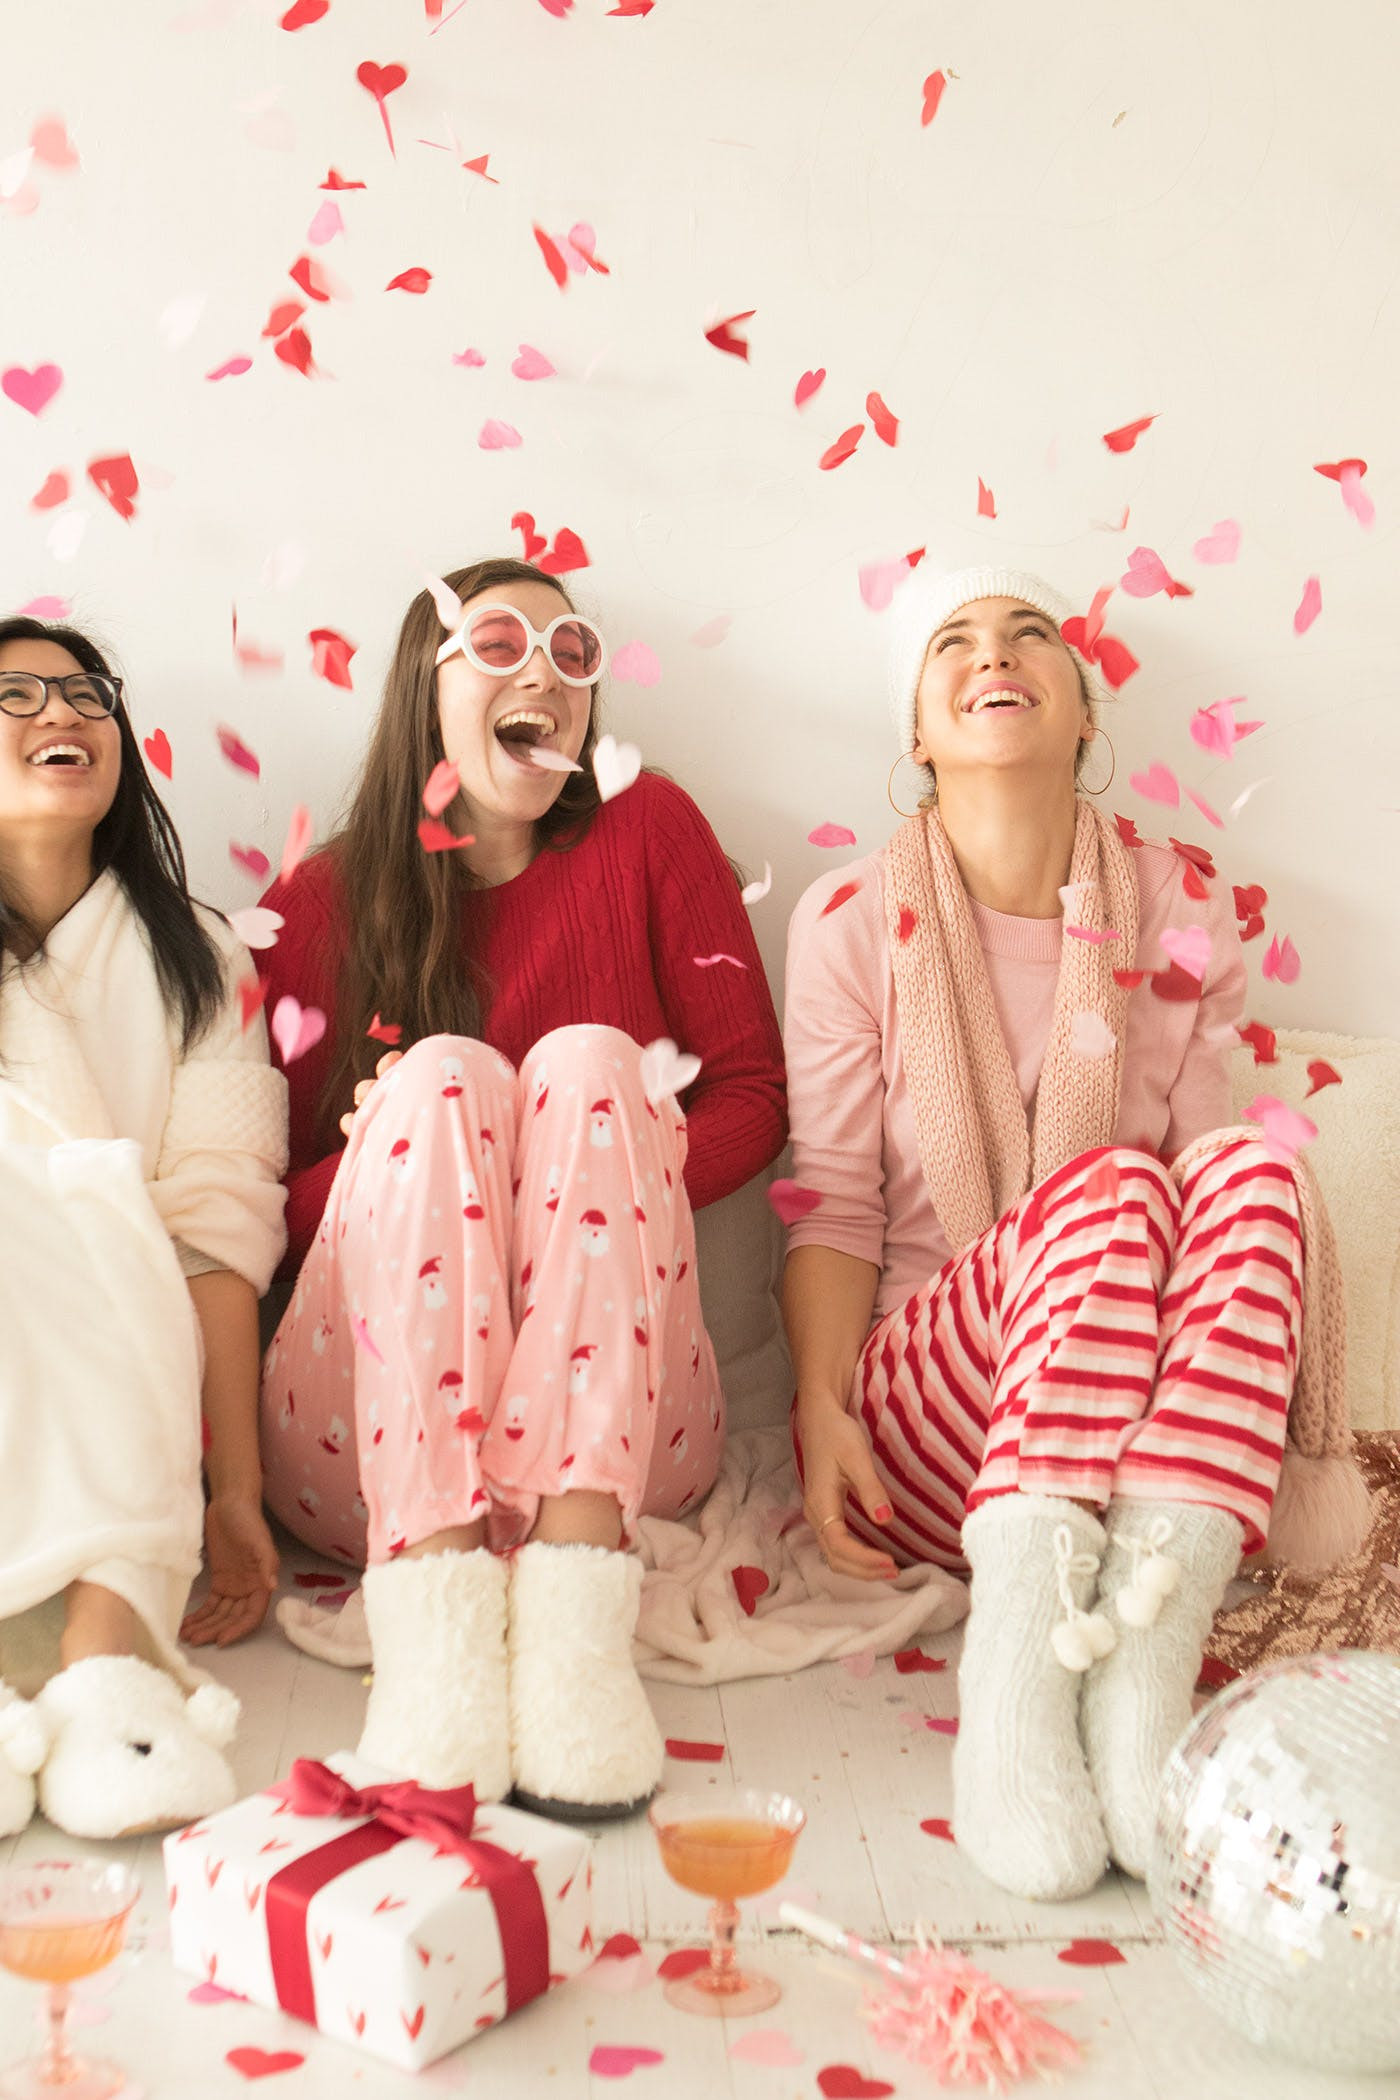 Ladies Christmas Party Ideas
 The Ultimate Guide to a La s ly Holiday Pajama Party